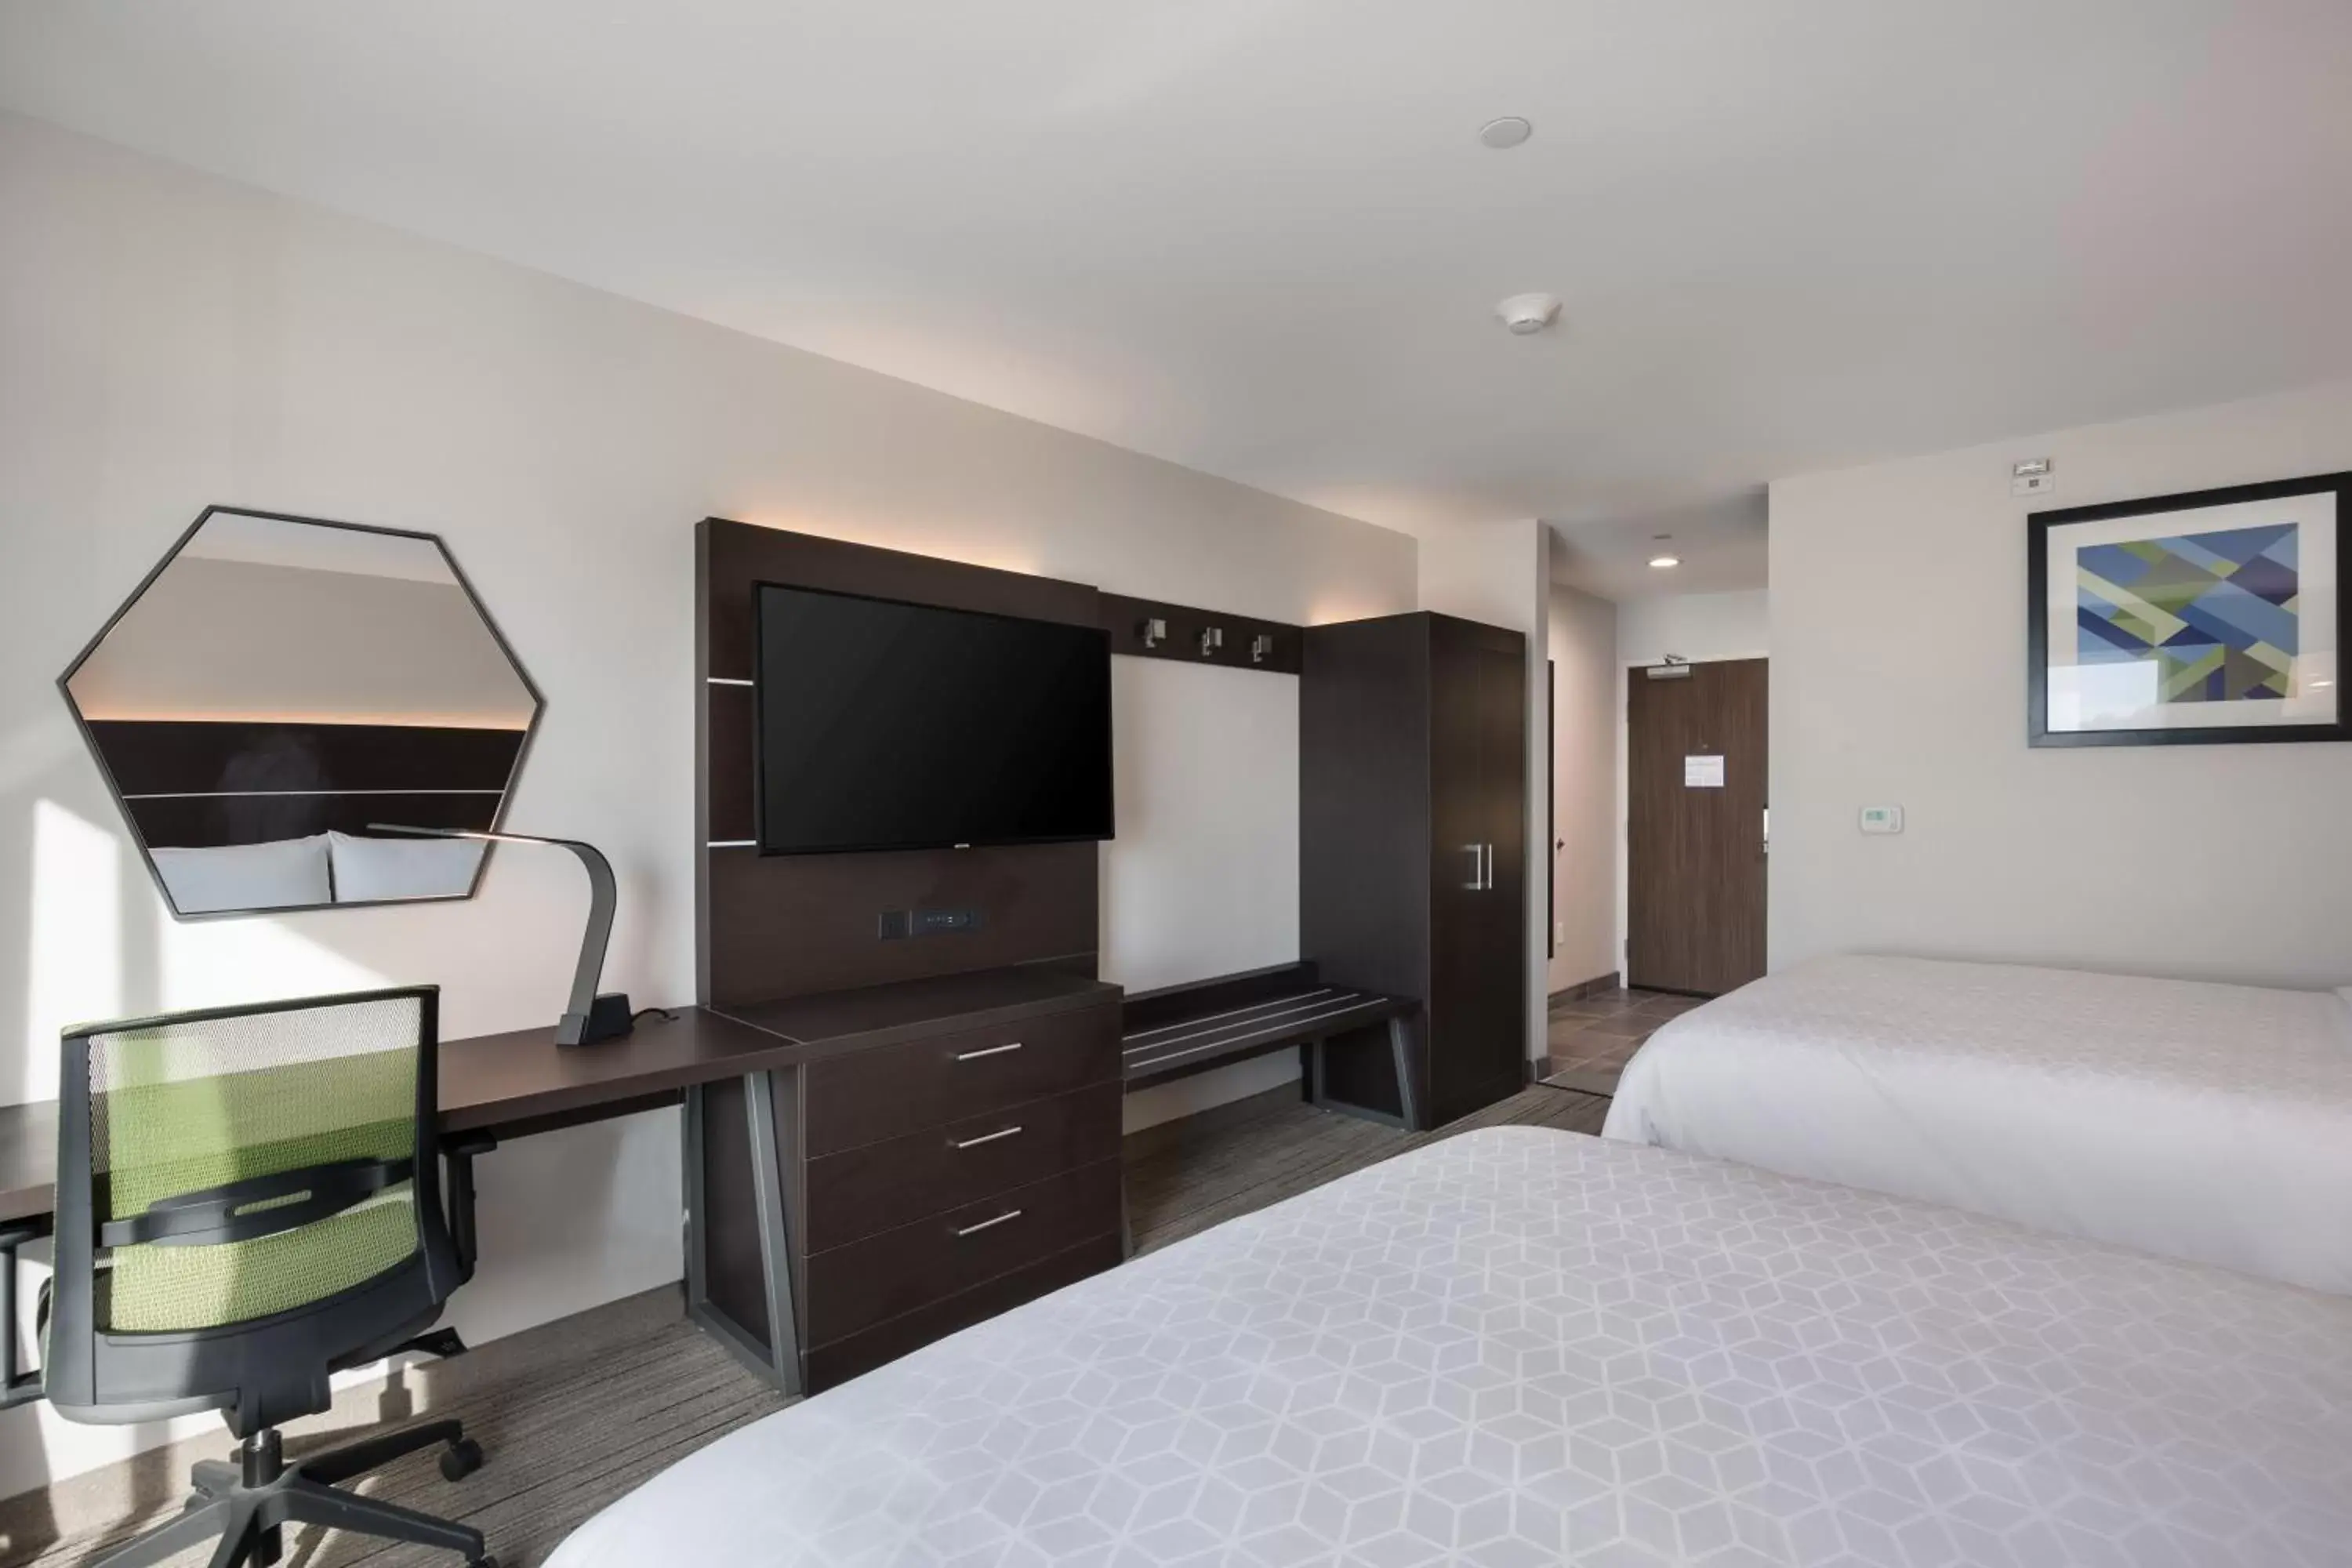 Bedroom, Room Photo in Holiday Inn Express & Suites Chicago - Hoffman Estates, an IHG Hotel